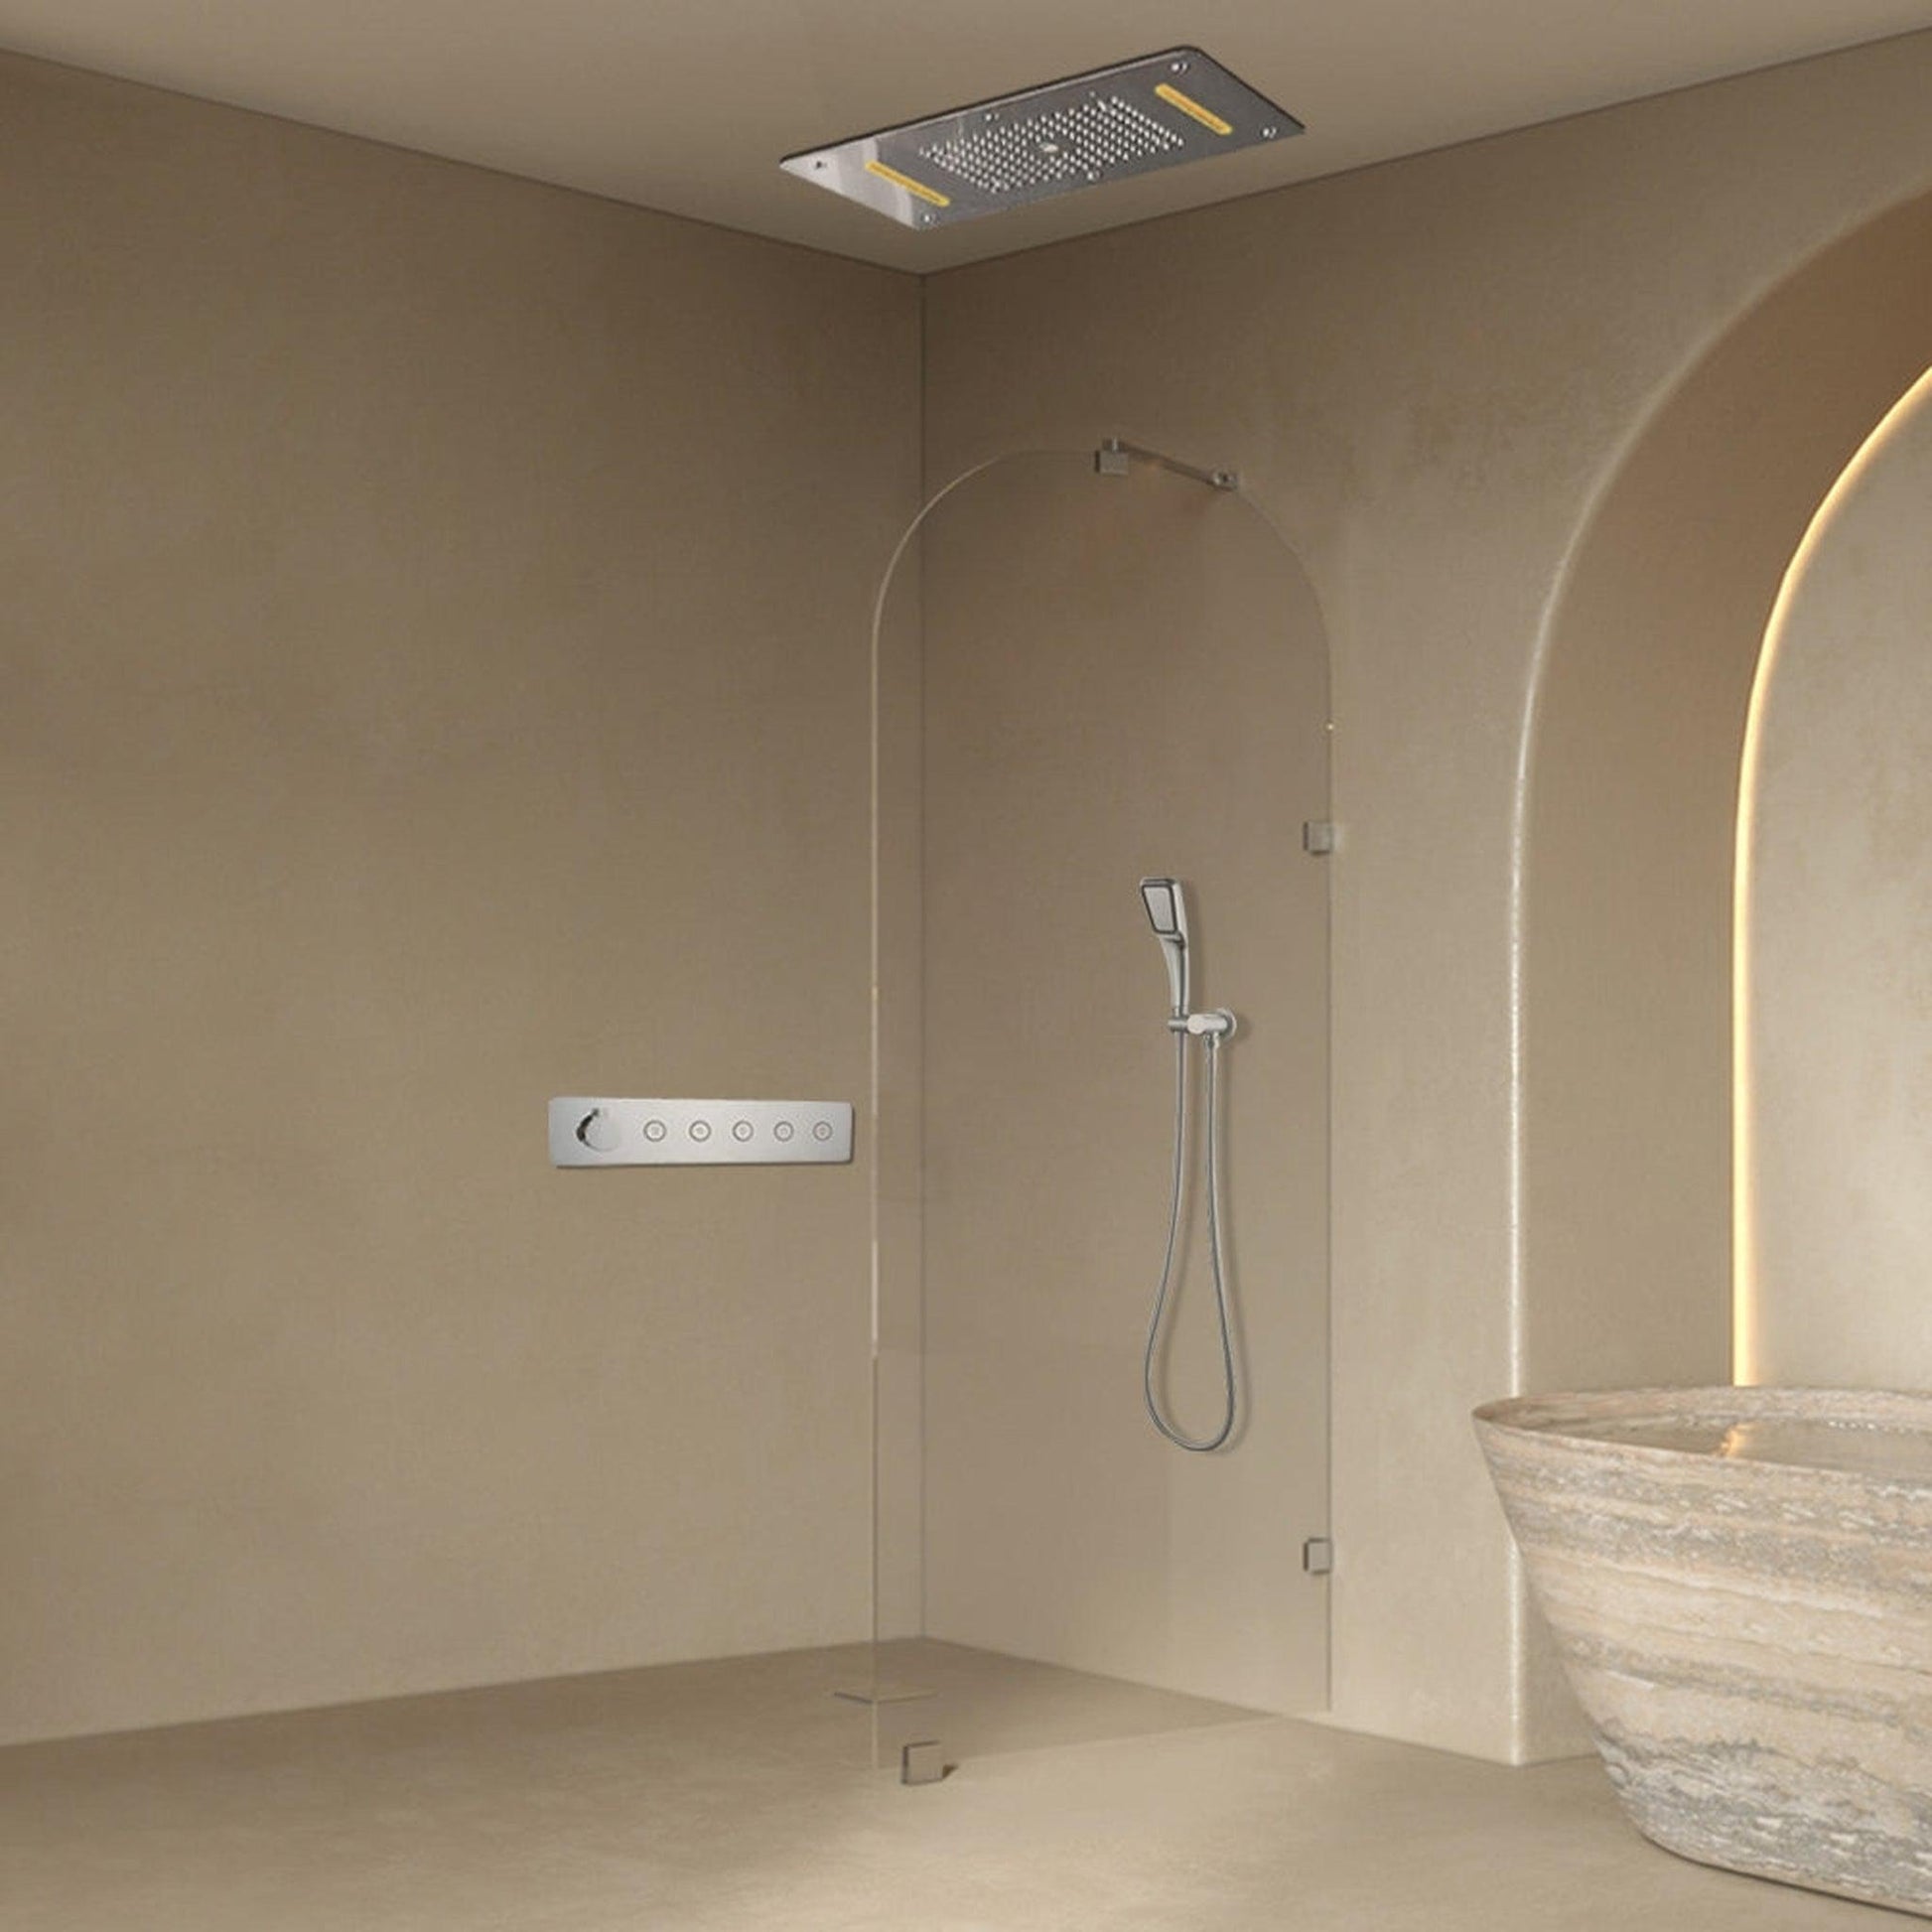 Fontana Ancona Chrome Recessed Ceiling Mounted Thermostatic LED Rainfall Shower System With Hand Shower